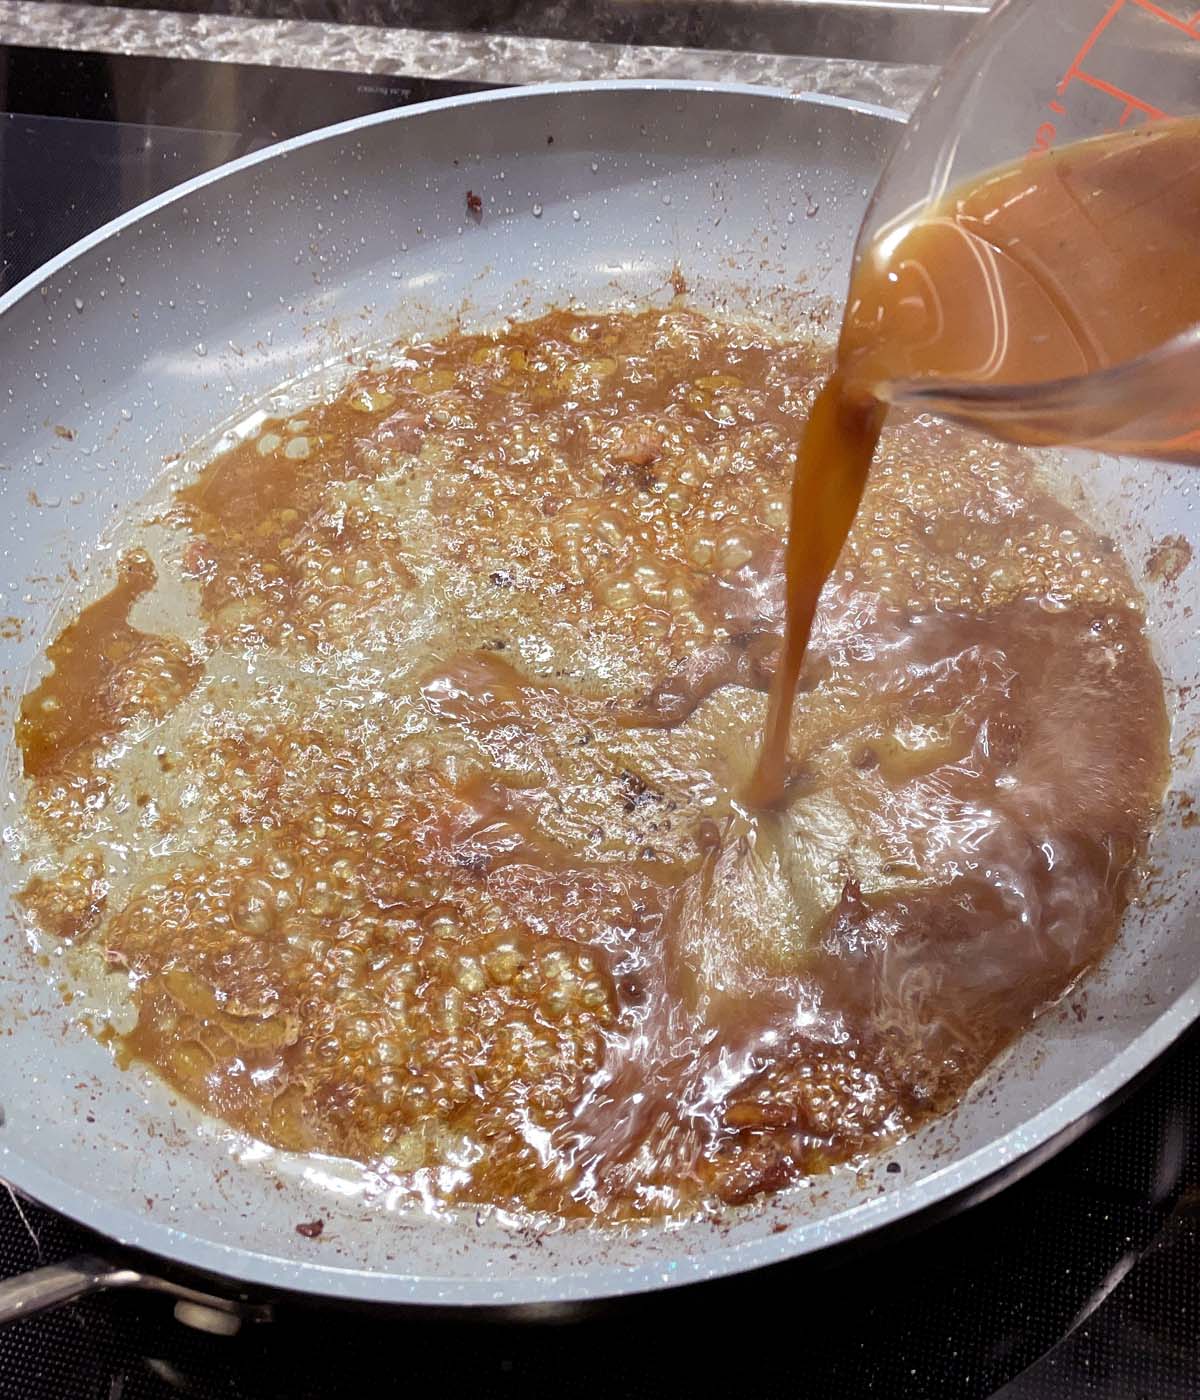 Brown liquid being poured and bubbling in a grey skillet.